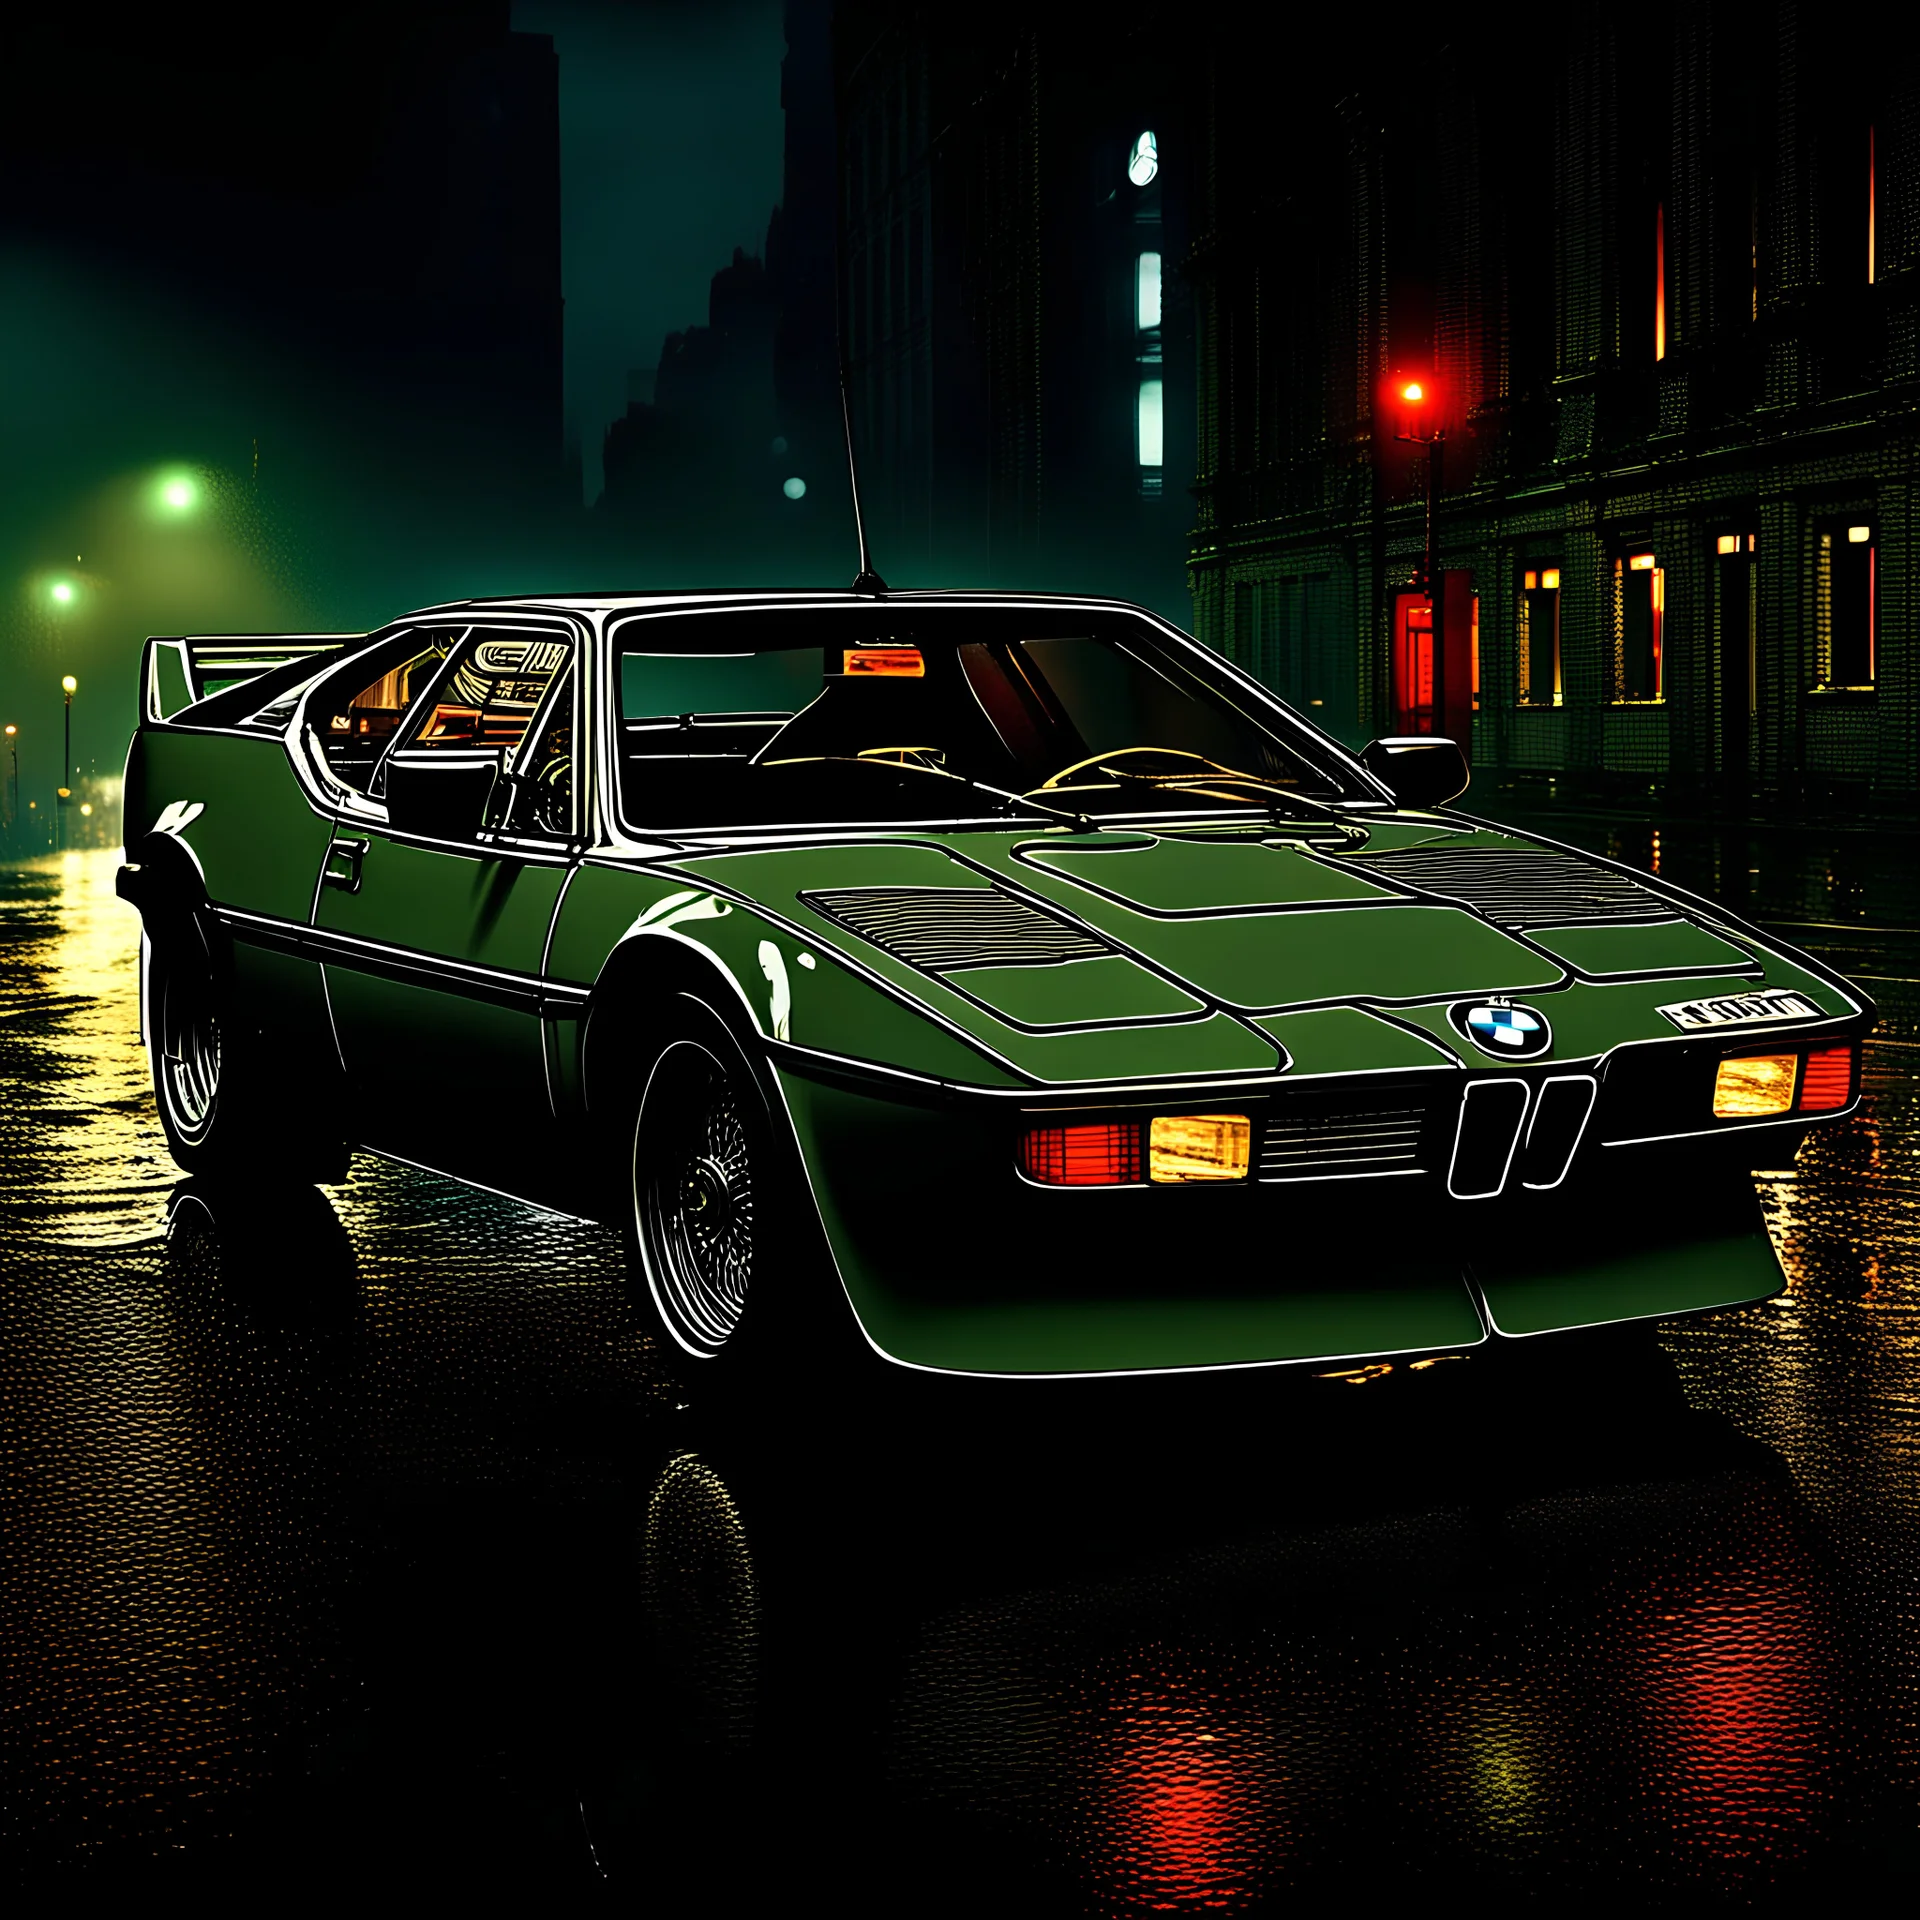 BMW M1 (1978–1981) in modern design, military graycolored supercar with swastika sign on door, rain, neon light reflections,4k,raytracing,night,driving, ((1940s ruined berlin background)), volumetric lights, with bright lights, Canon 5d, photorealism, candy, stance works,widebody, hyperreal, selective bloom, dof, thin lines, 64k textures, neon lights from cyberpunk with raytracing, hyperdetailed car textures with noise and bump map, postrprocessing, depth pass, cinematic view, dramatic light